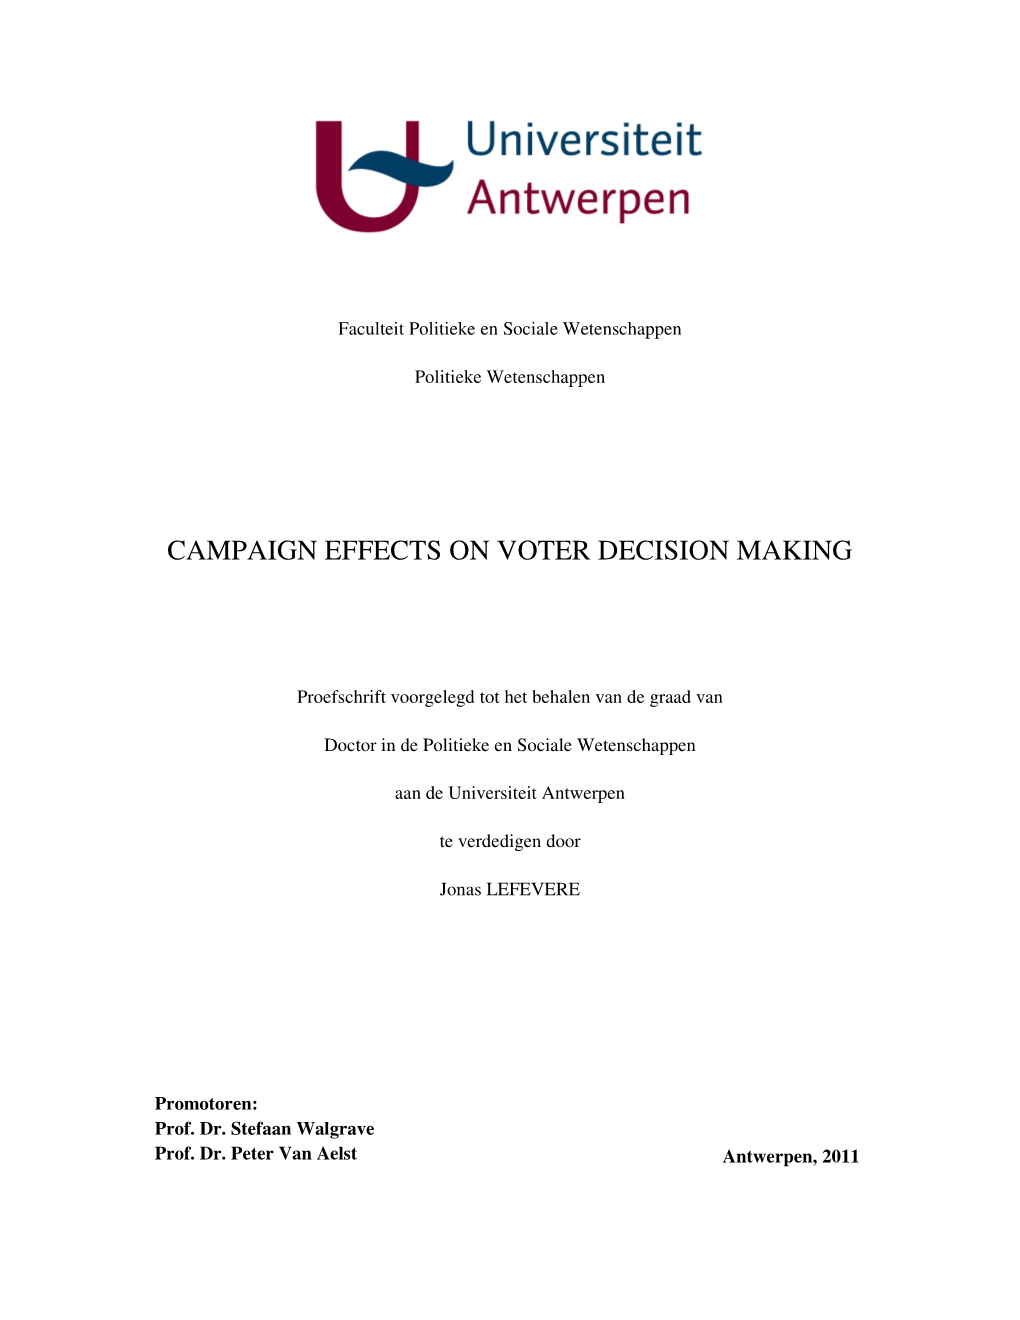 Campaign Effects on Voter Decision Making